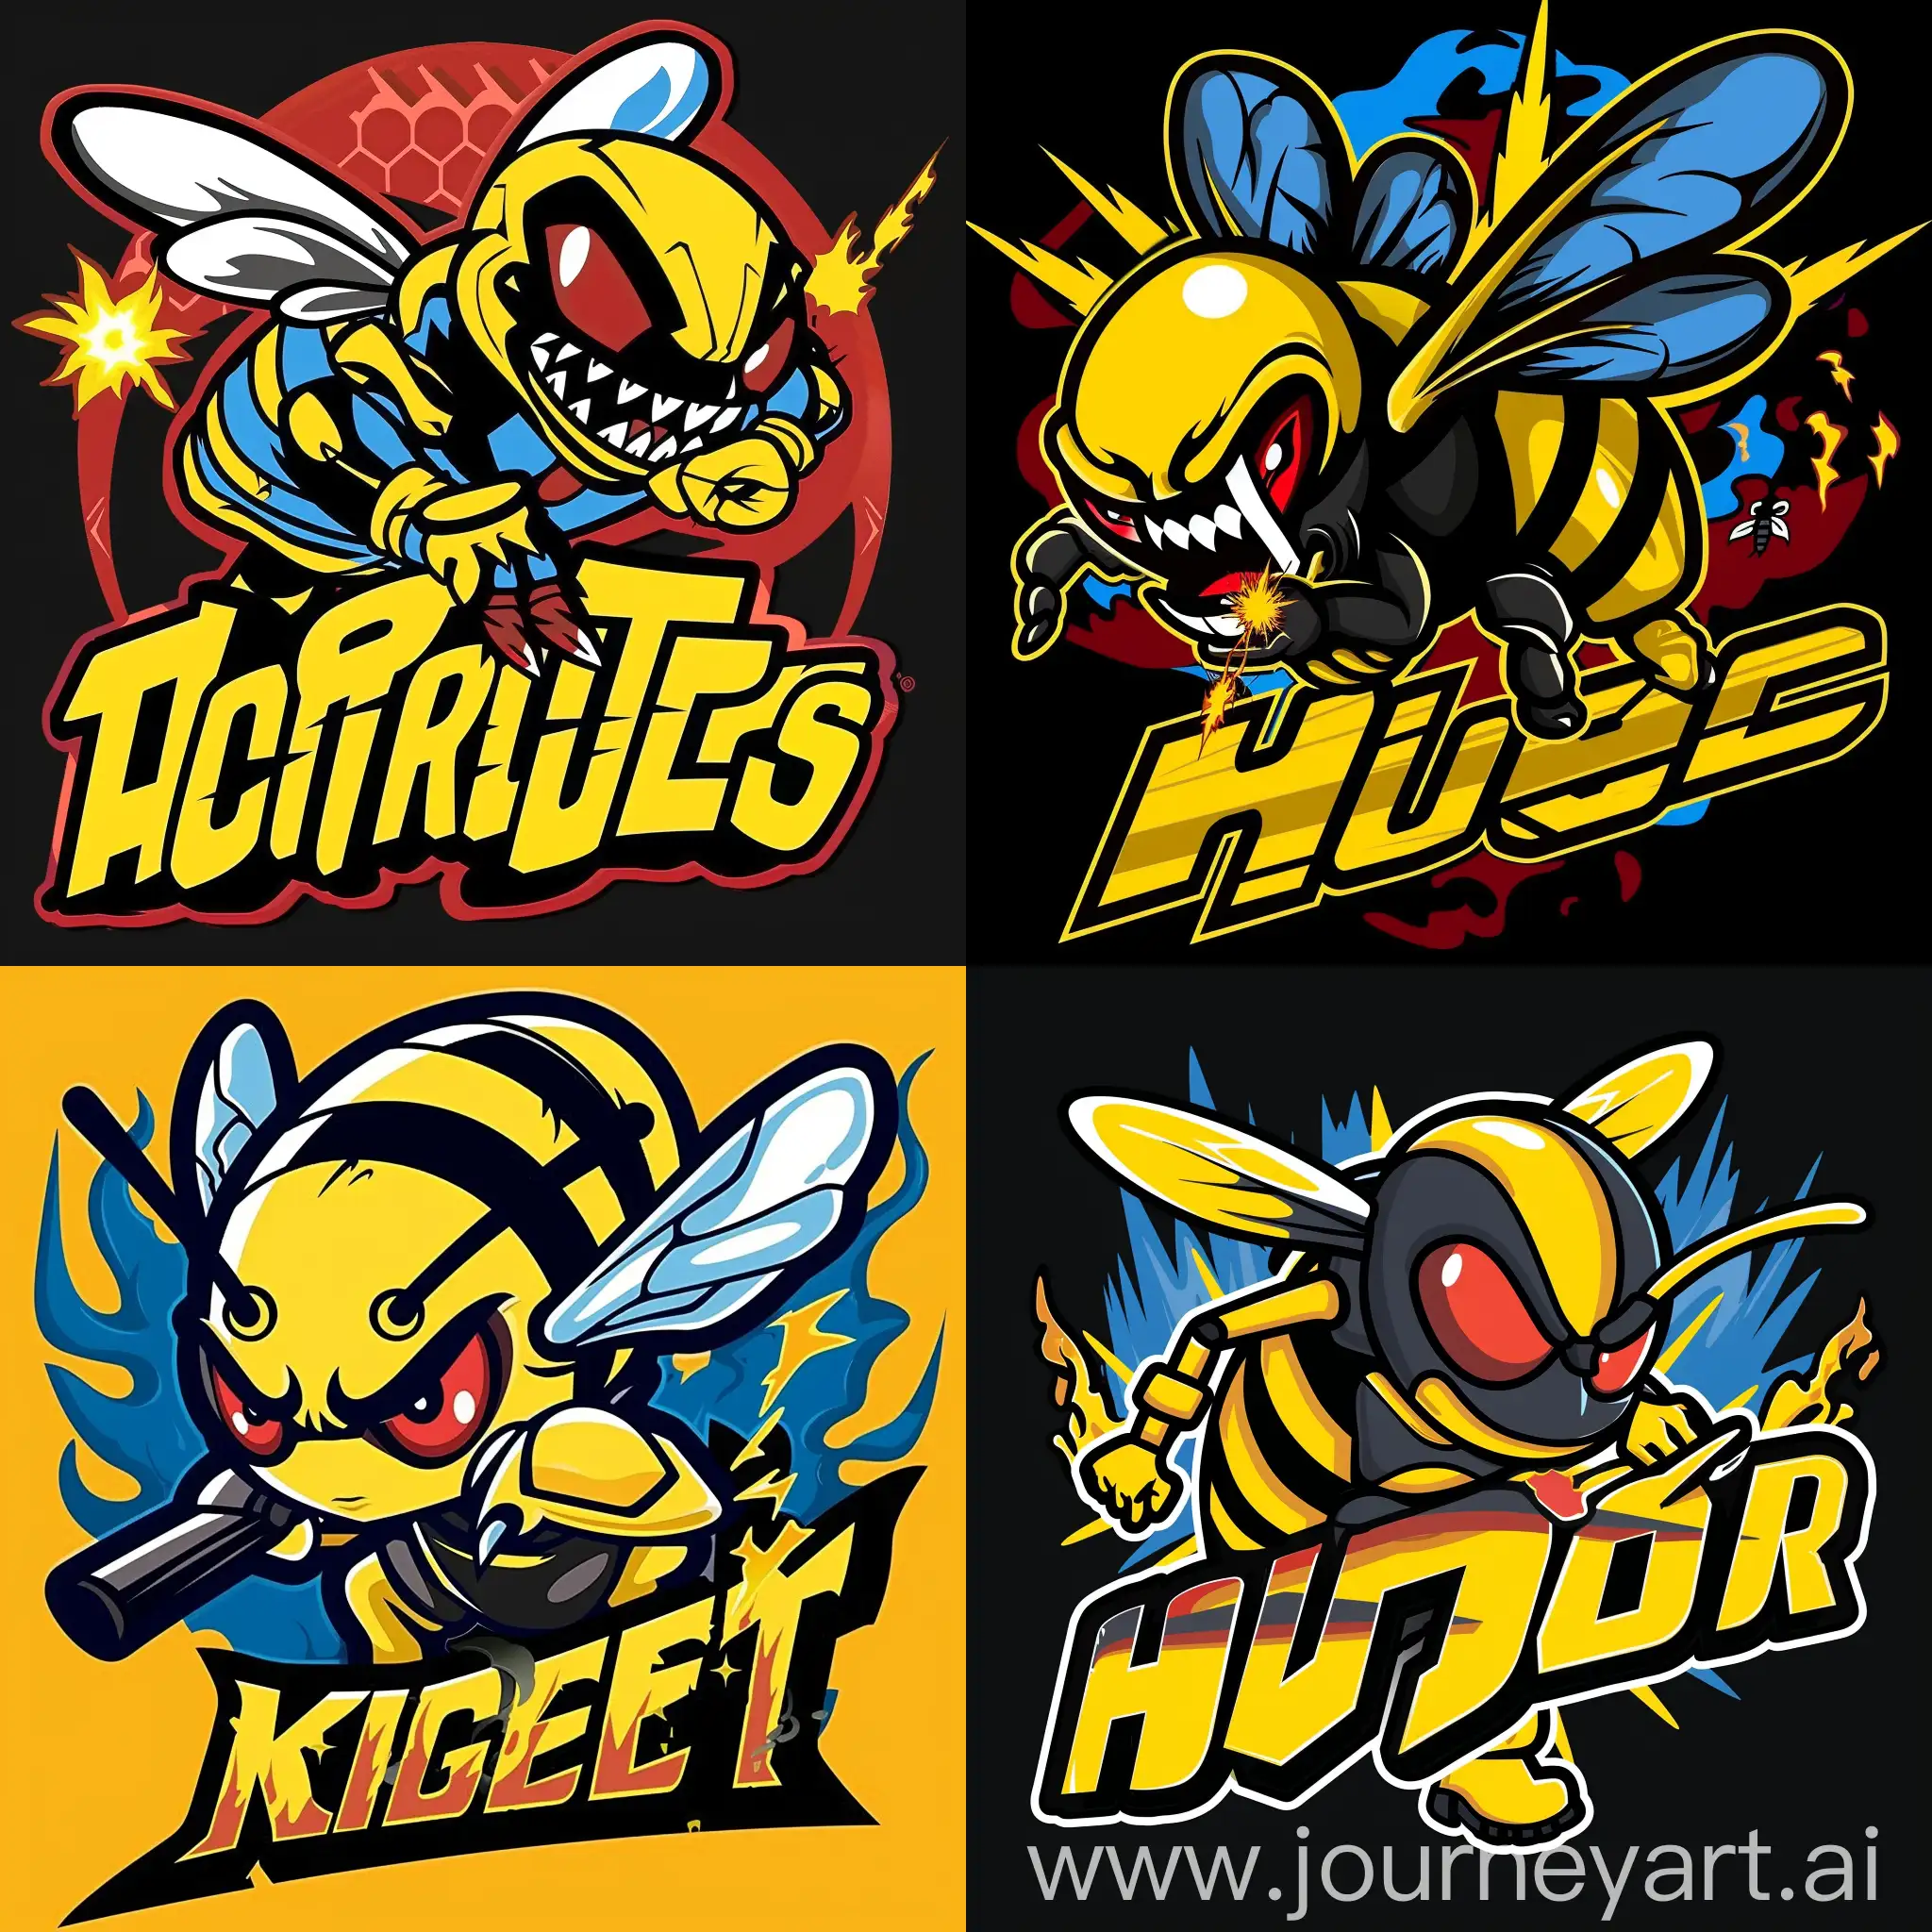 The mascot is a logo of an angry bee with red eyes, bright yellow and black stripes on its body and wings. The bee is upright in an attacking position, and carries the traditional West Javanese weapon of the kujang. You can add sparks or whirlwinds around him to accentuate his evil appearance. The logo is made in bright colors - yellow, black and red, so that it stands out on the athlete's uniform and attracts the attention of the audience.